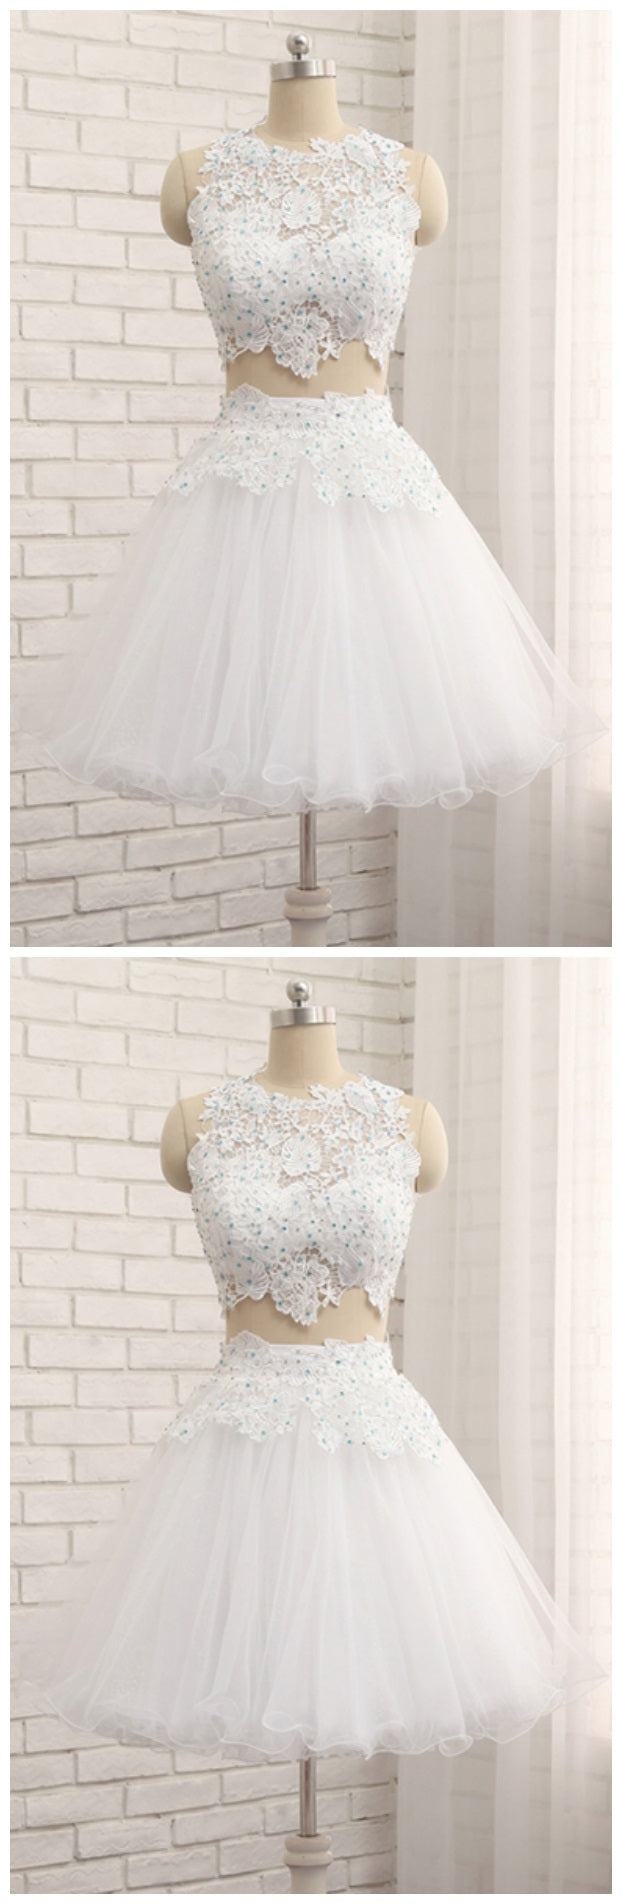 White Lace Juniors Prom Dress Two Piece Homecoming Dress